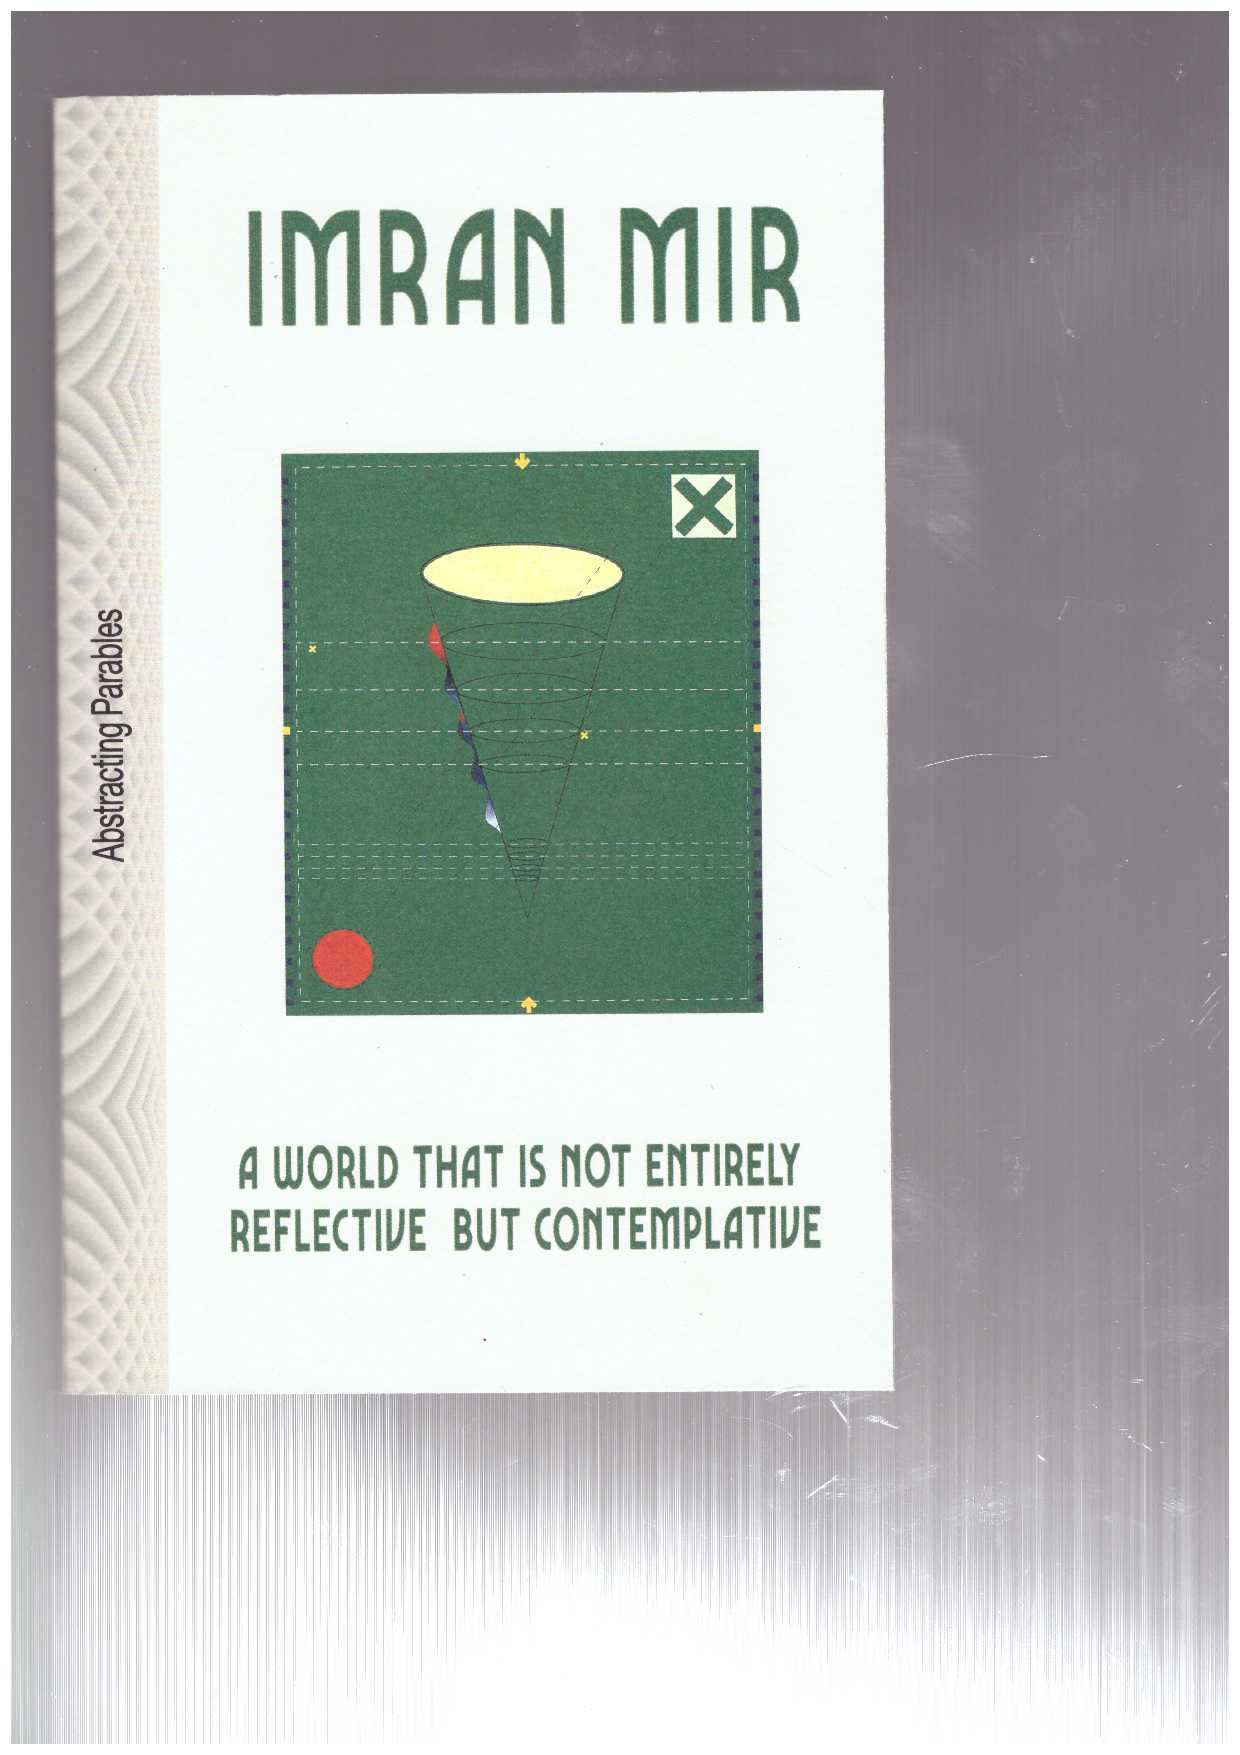 MIR, Imran - Imran Mir. A World that is not entirely Reflective but Contemplative